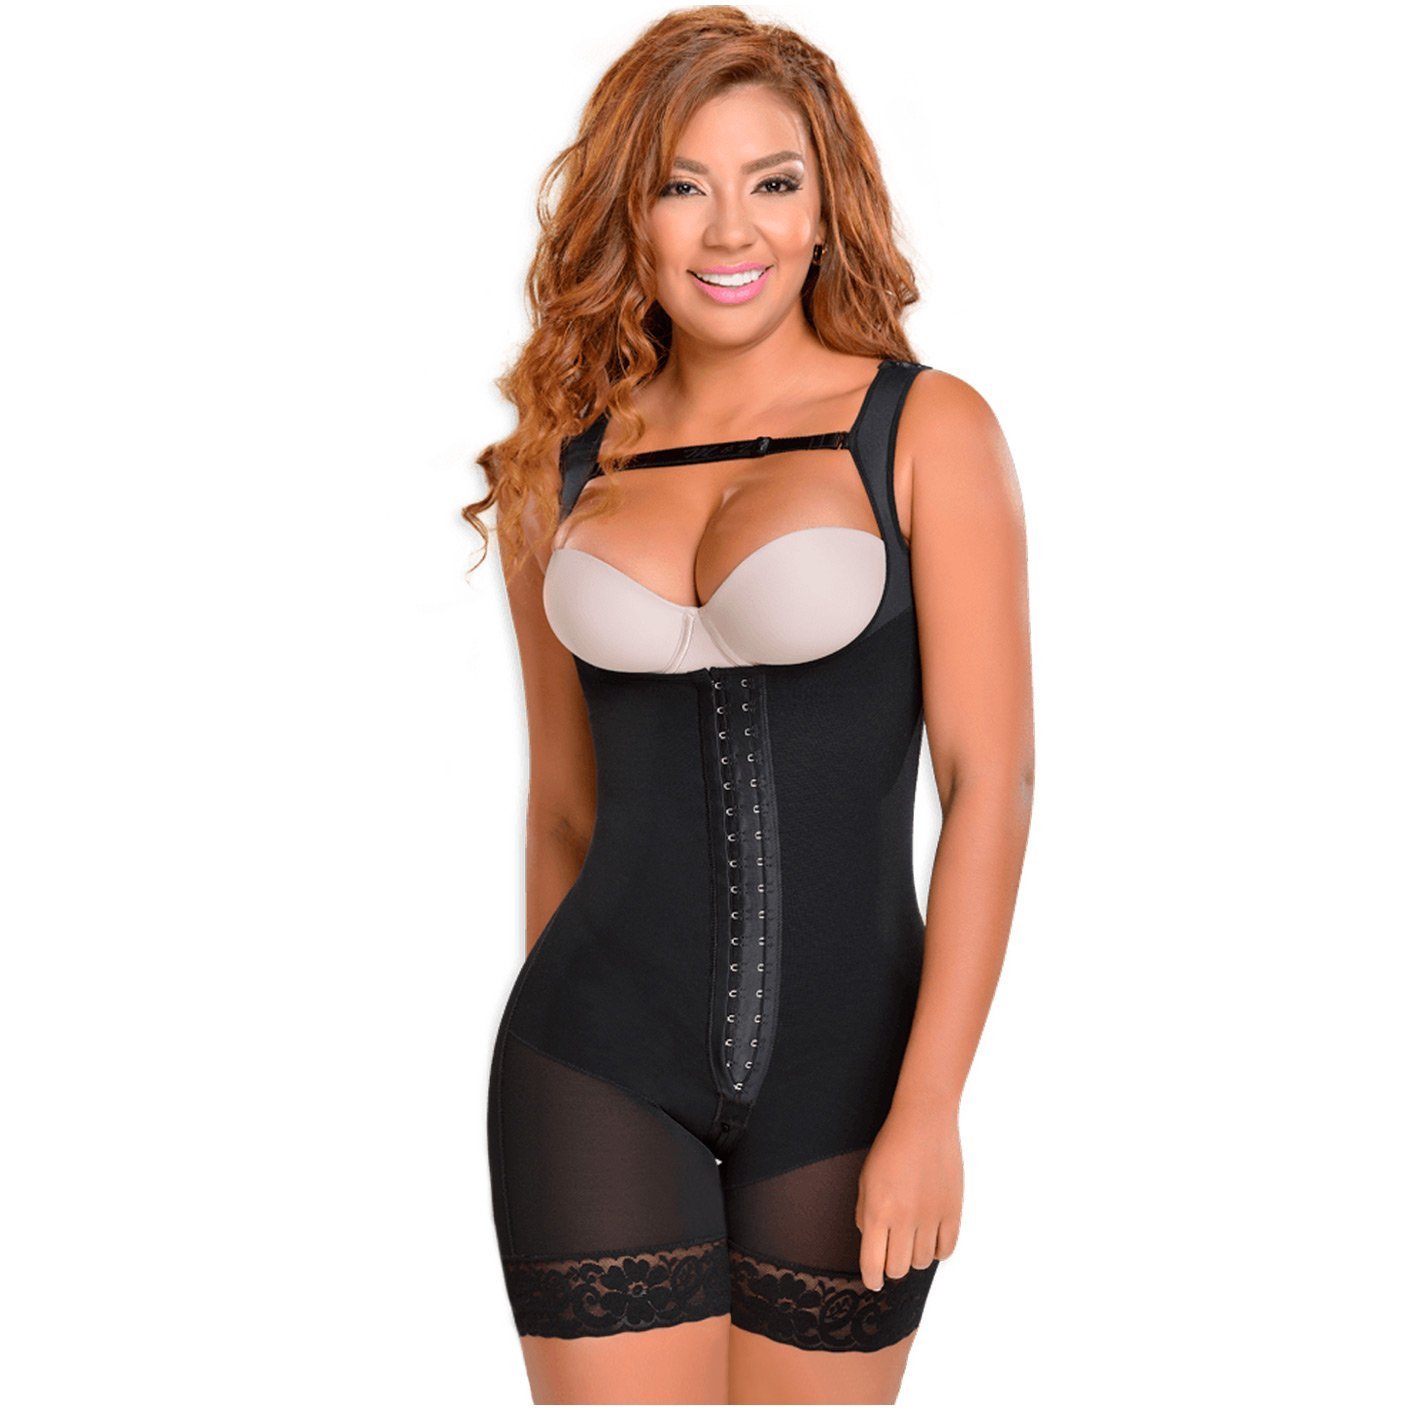 MYD F0065 - MID-THIGH FAJA WITH BACK COVERAGE AND WIDE STRAPS